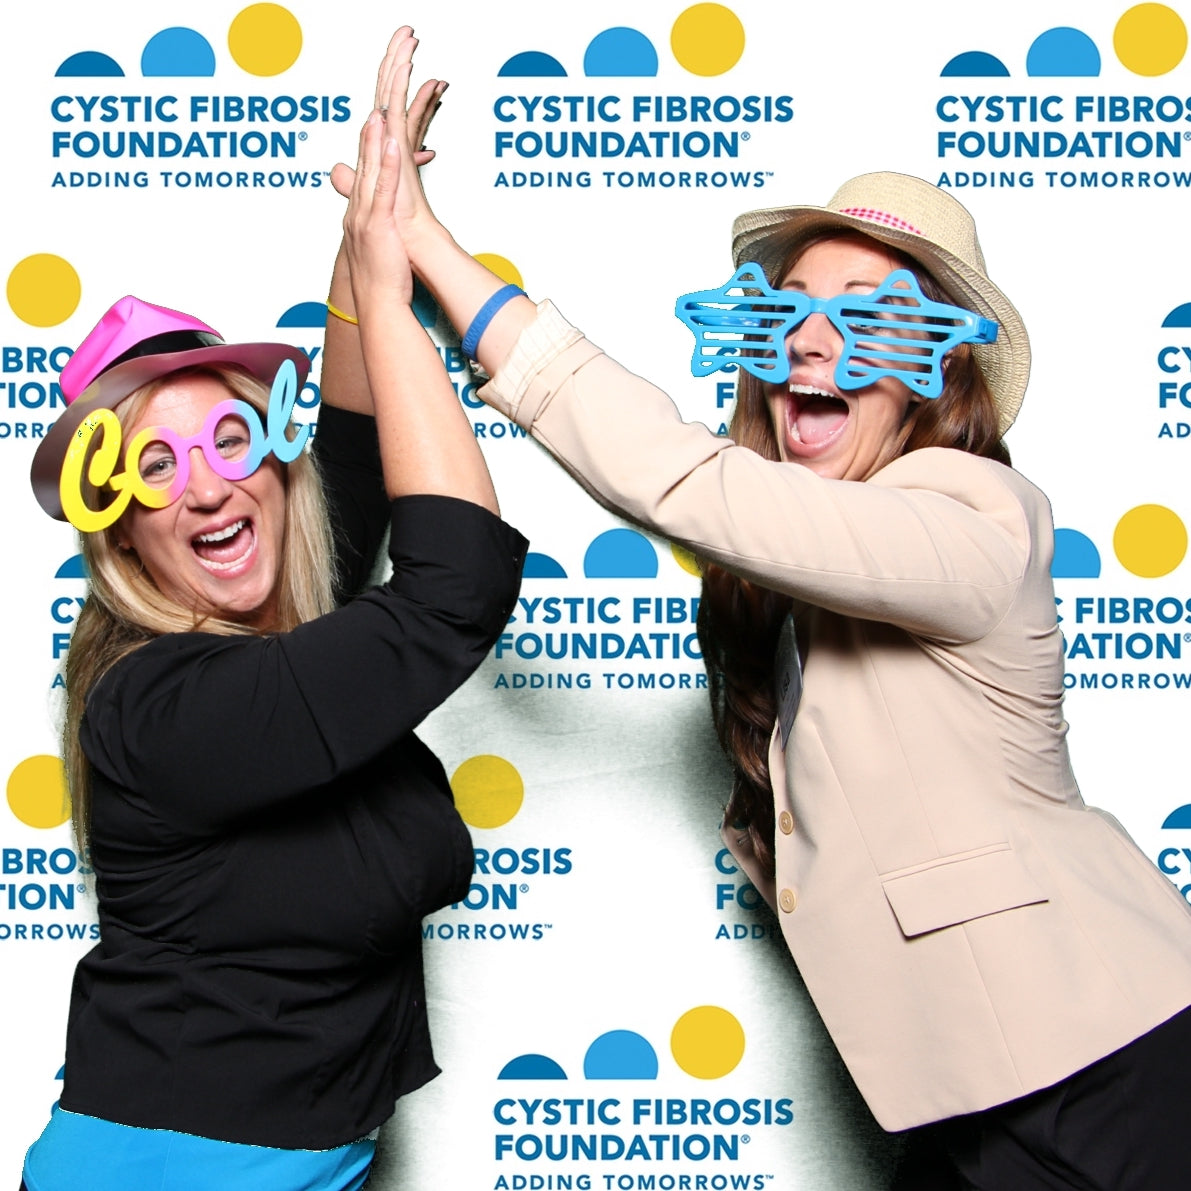 Women high fiving in a photo booth at the Cystic Fibrosis Foundation Gala